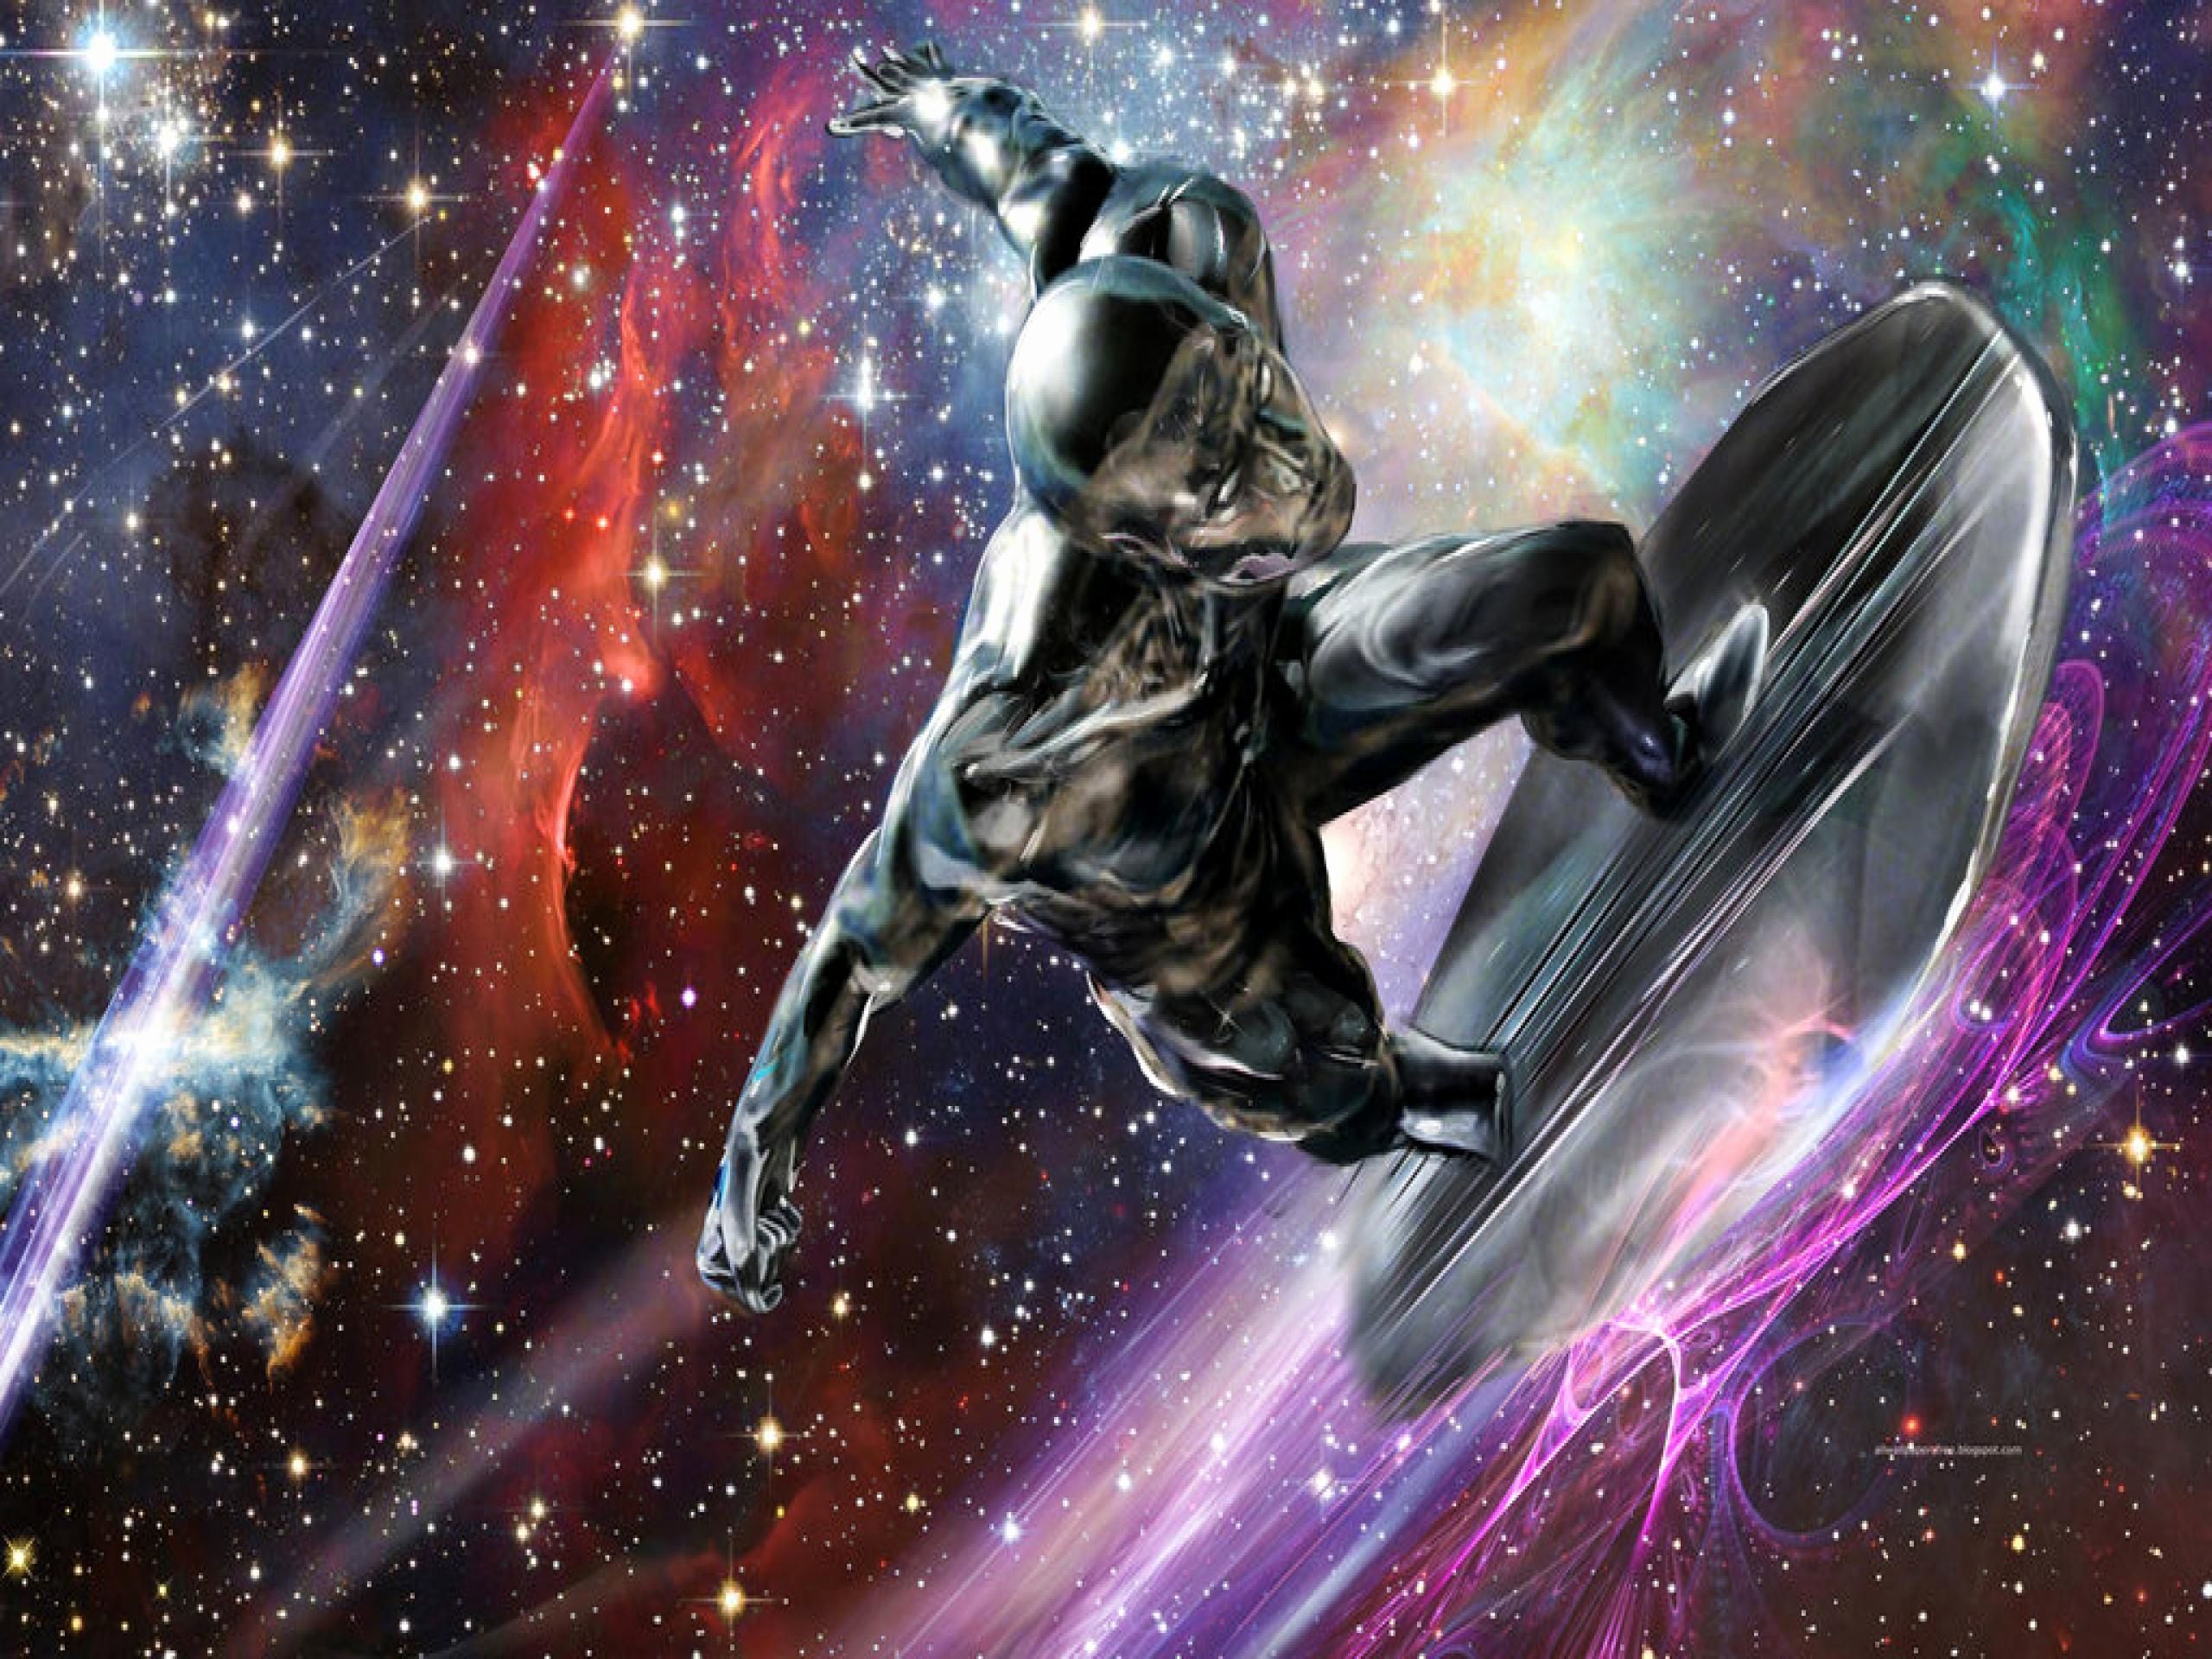 Unique Silver Surfer Wallpaper This Month of The Hudson